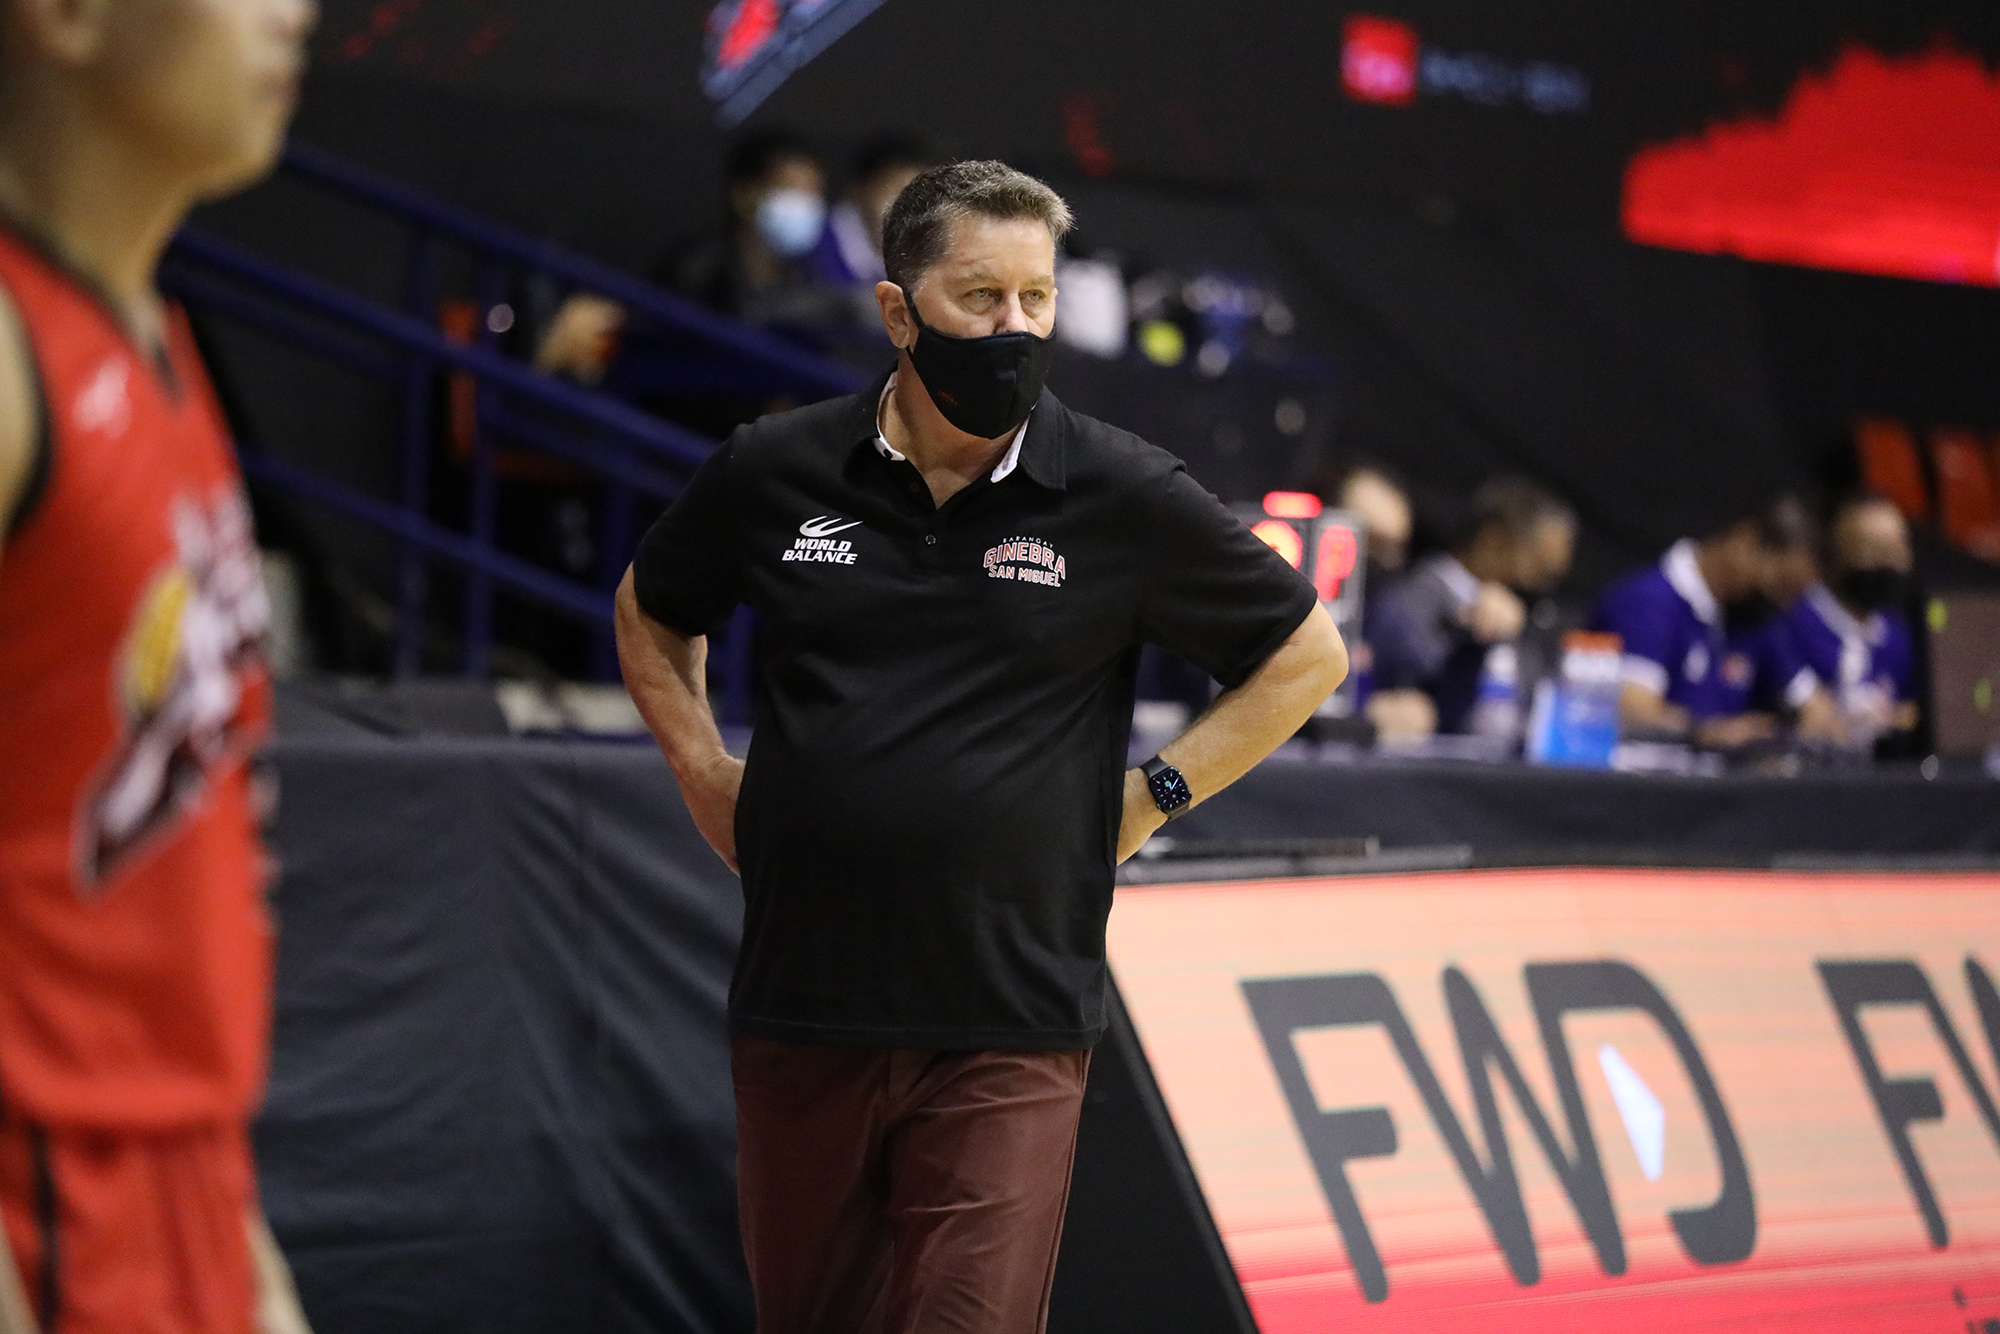 Ginebra coach Tim Cone, a former Alaska mentor, during against the Gin Kings and the Aces in the 2021 PBA Governors' Cup.